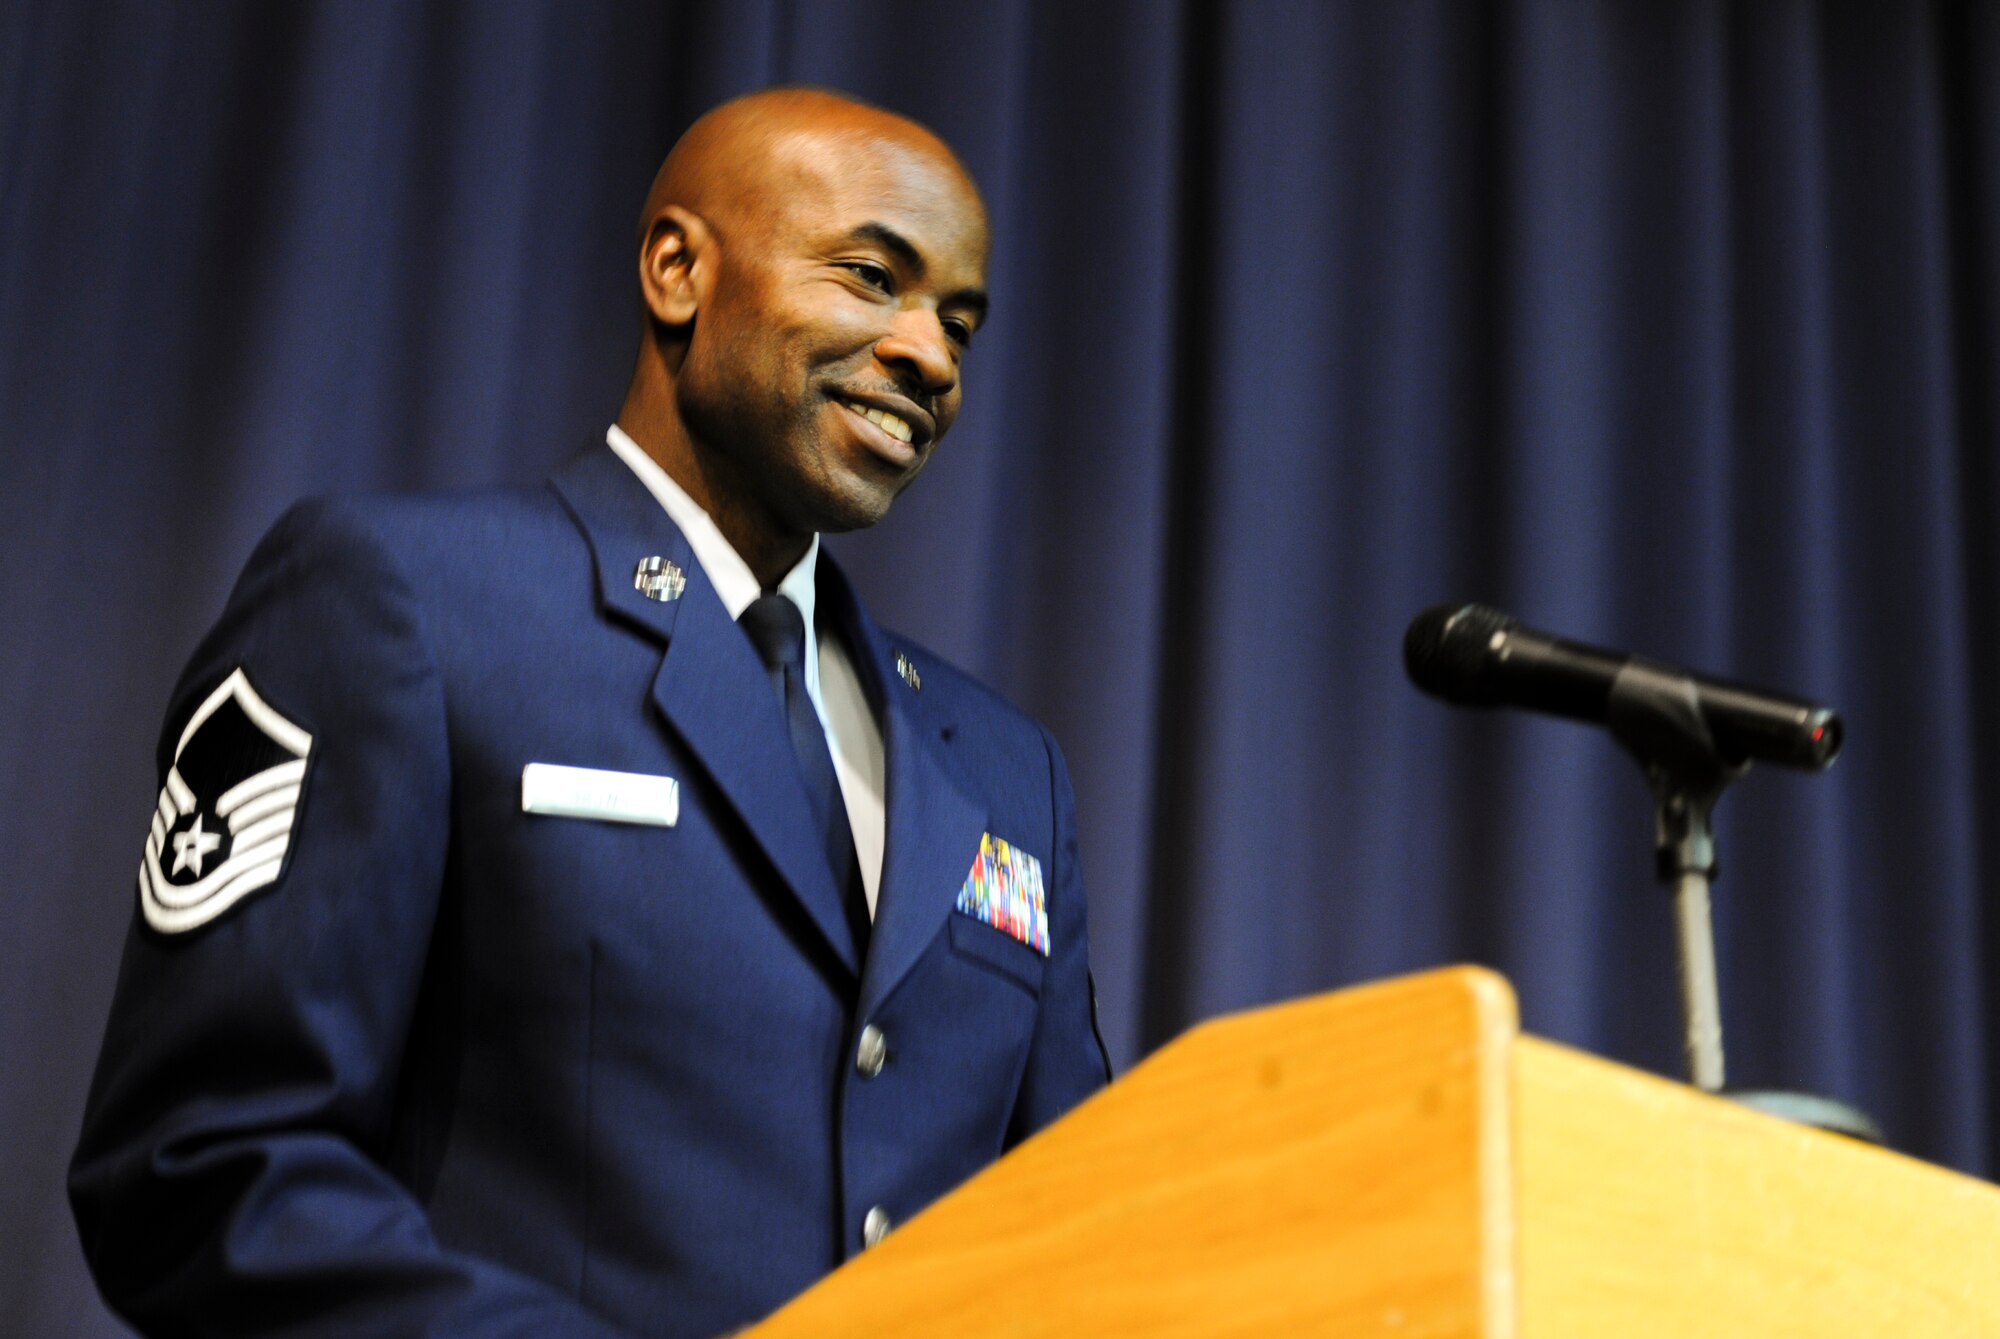 Master Sgt. Tommy Brown, Air Force Special Operations Command, speaks during an NCO-Induction ceremony at Hurlburt Field, Fla., Nov. 26, 2014. An NCO-Induction ceremony is a time-honored tradition of welcoming the newest military leaders. (U.S. Air Force photo/Senior Airman Christopher Callaway)